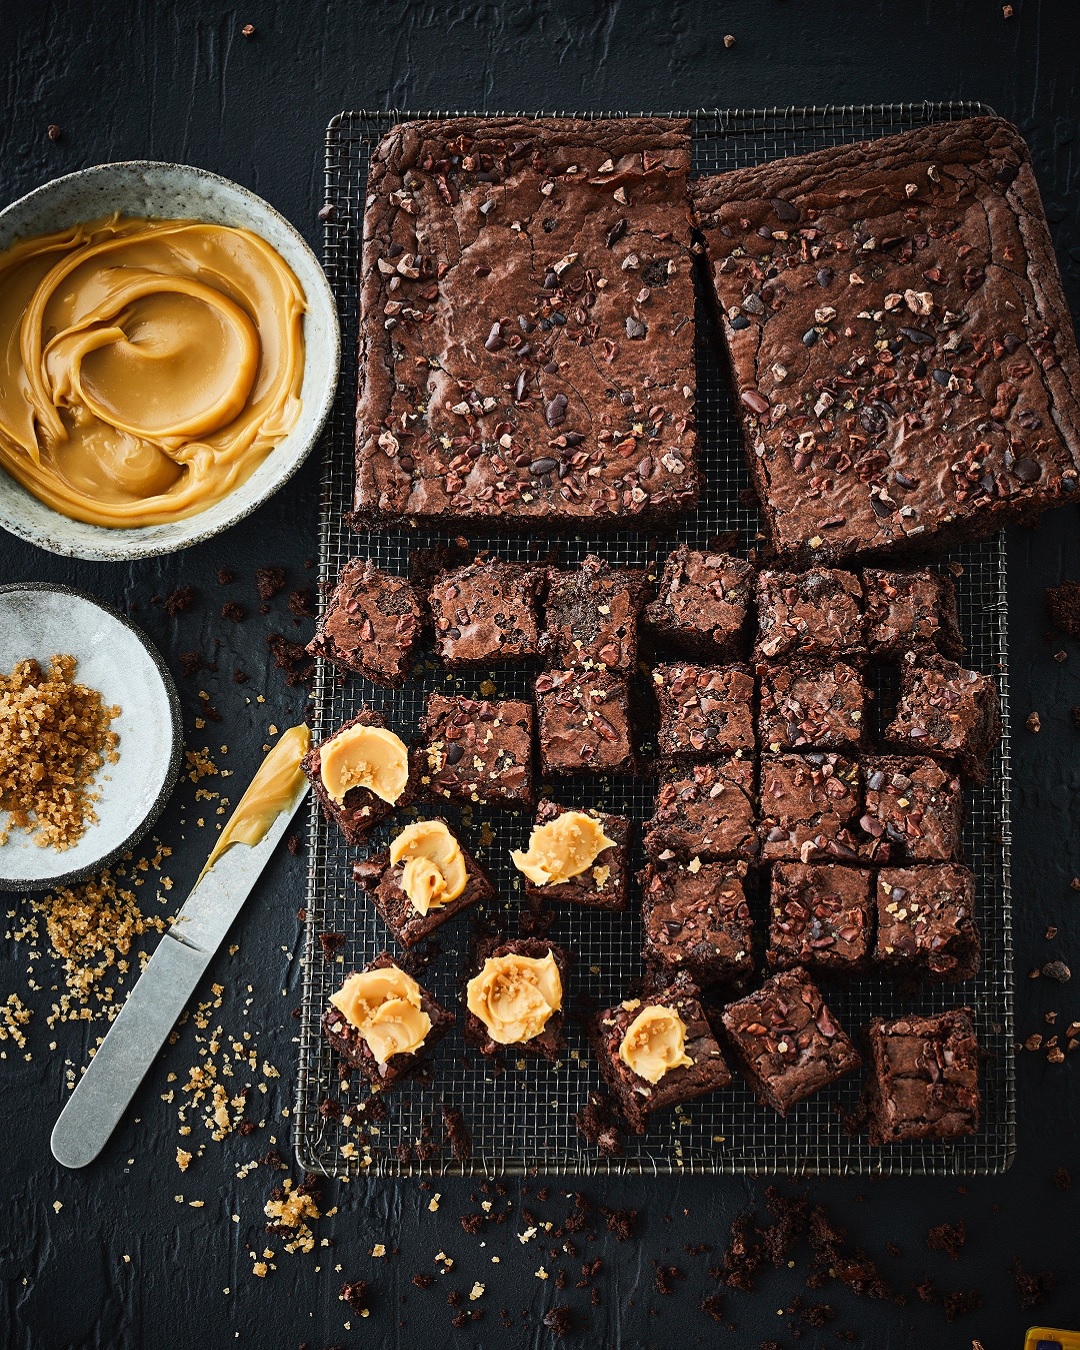 Chocolate brownie with peanut butter and salt